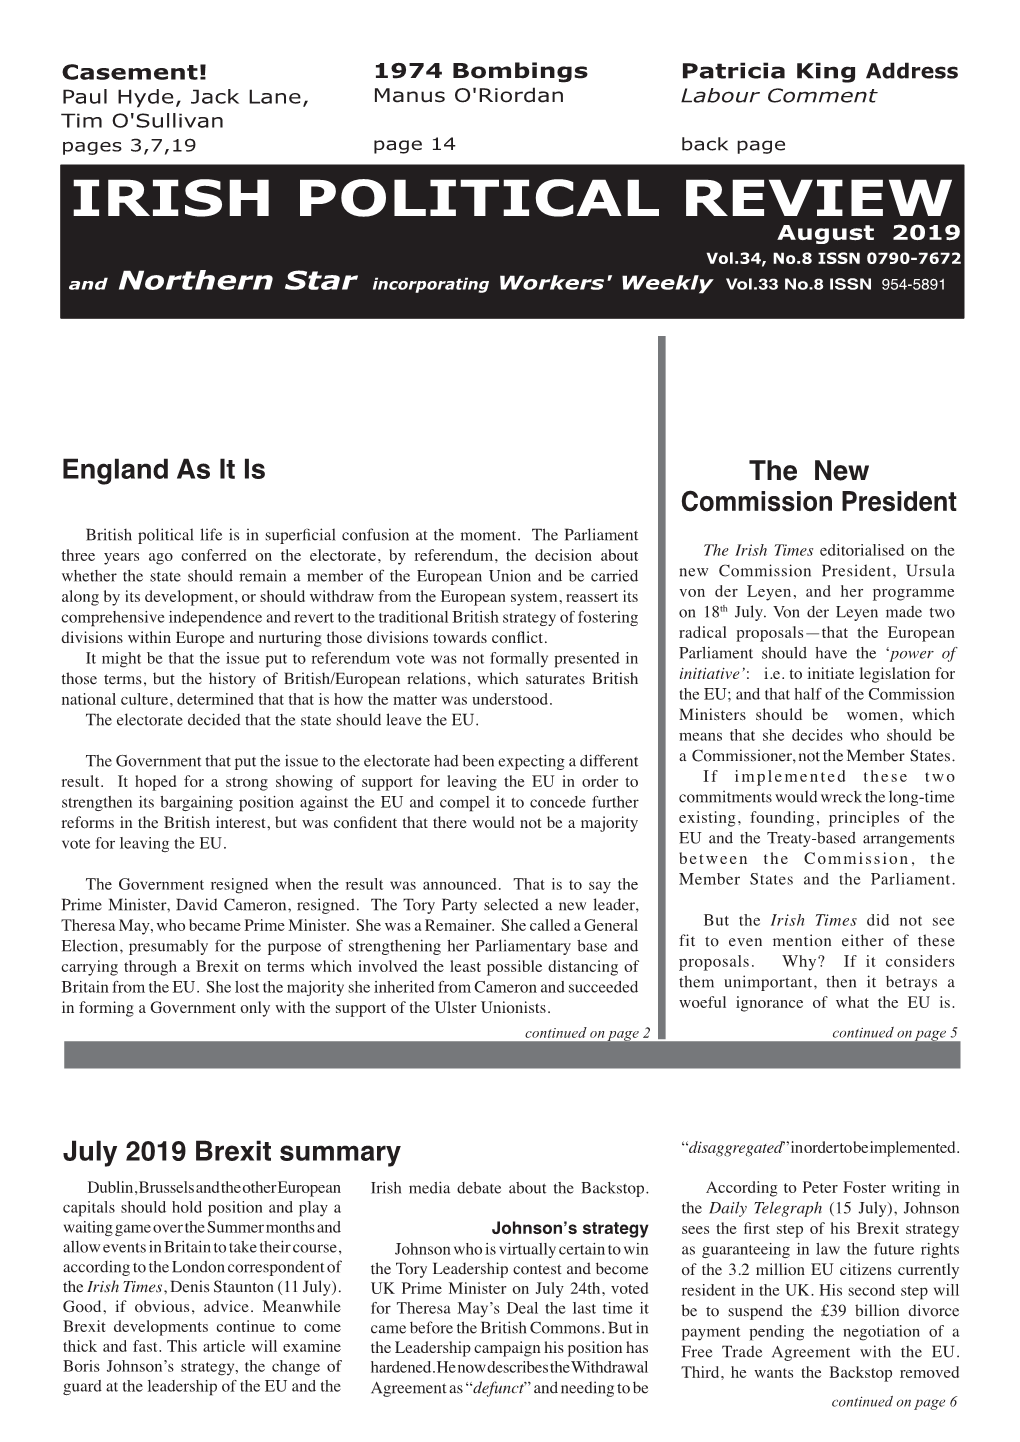 IRISH POLITICAL REVIEW August 2019 Vol.34, No.8 ISSN 0790-7672 and Northern Star Incorporating Workers' Weekly Vol.33 No.8 ISSN 954-5891